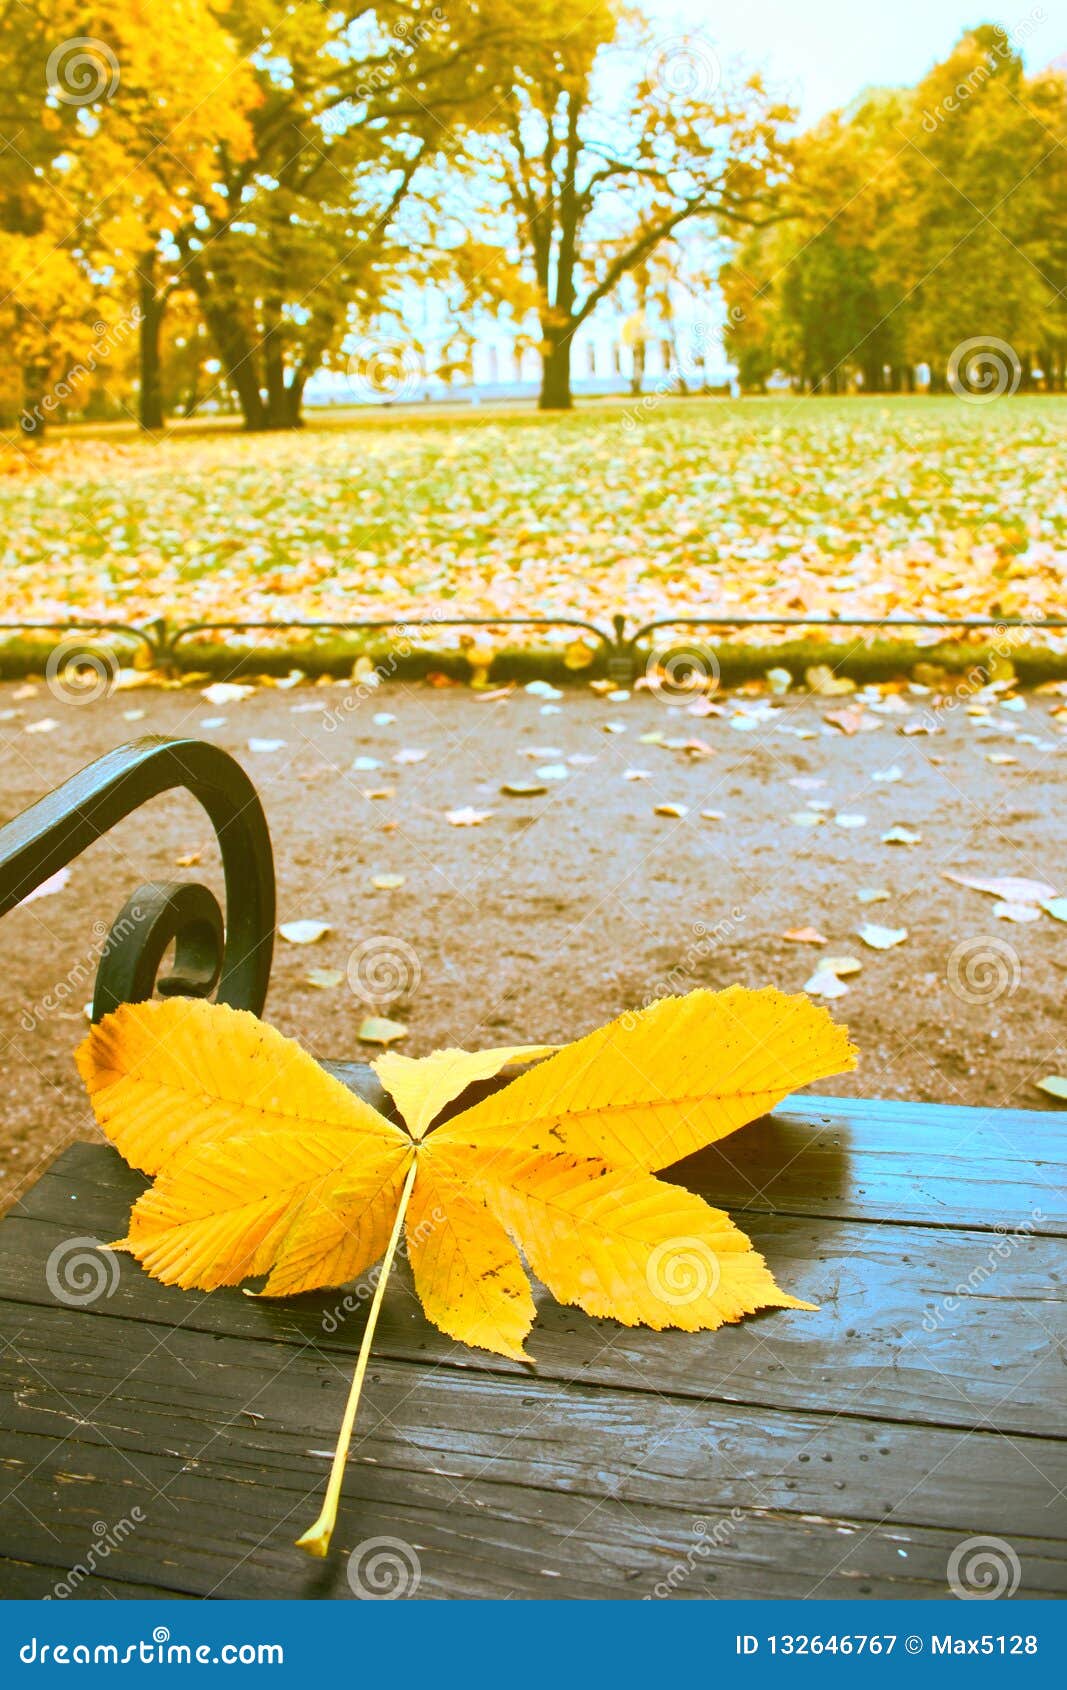 Falling Leaves. Autumn in City Park in Yellow Leaves Stock Image